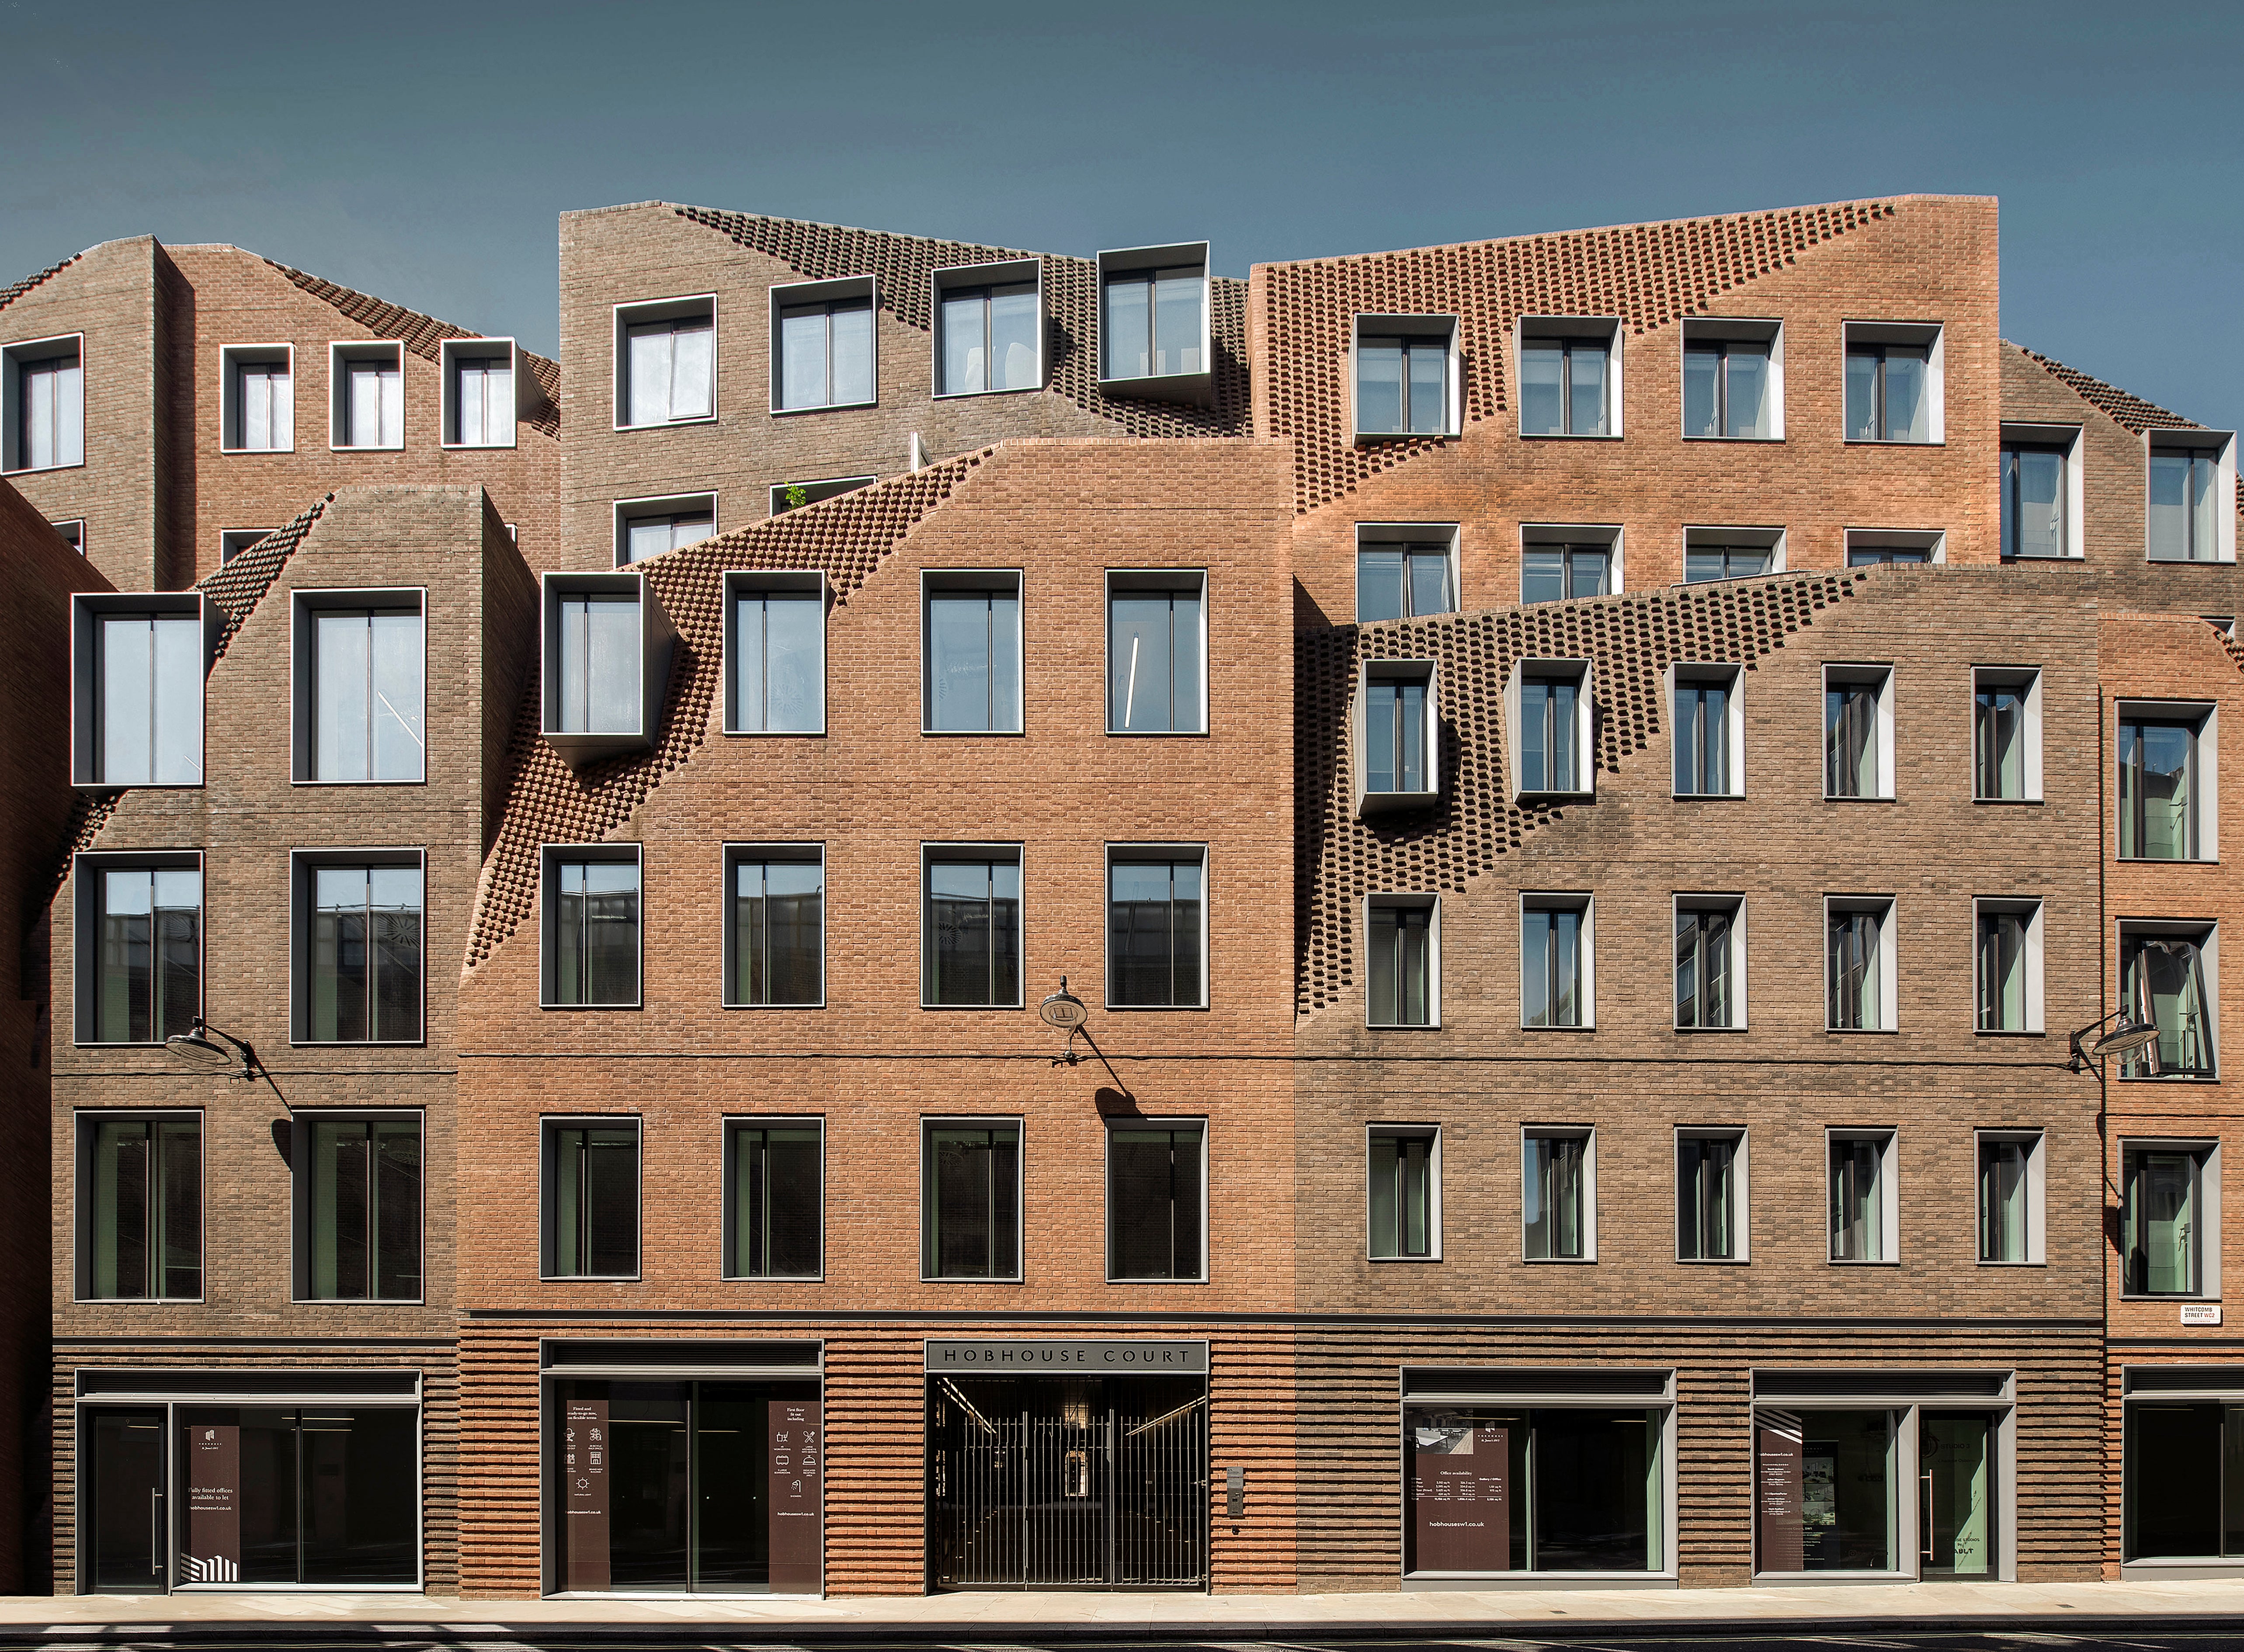 Real sustainability: Durable products like clay brick will prolong the expected life of a building, resulting in a lower carbon footprint for every year of use